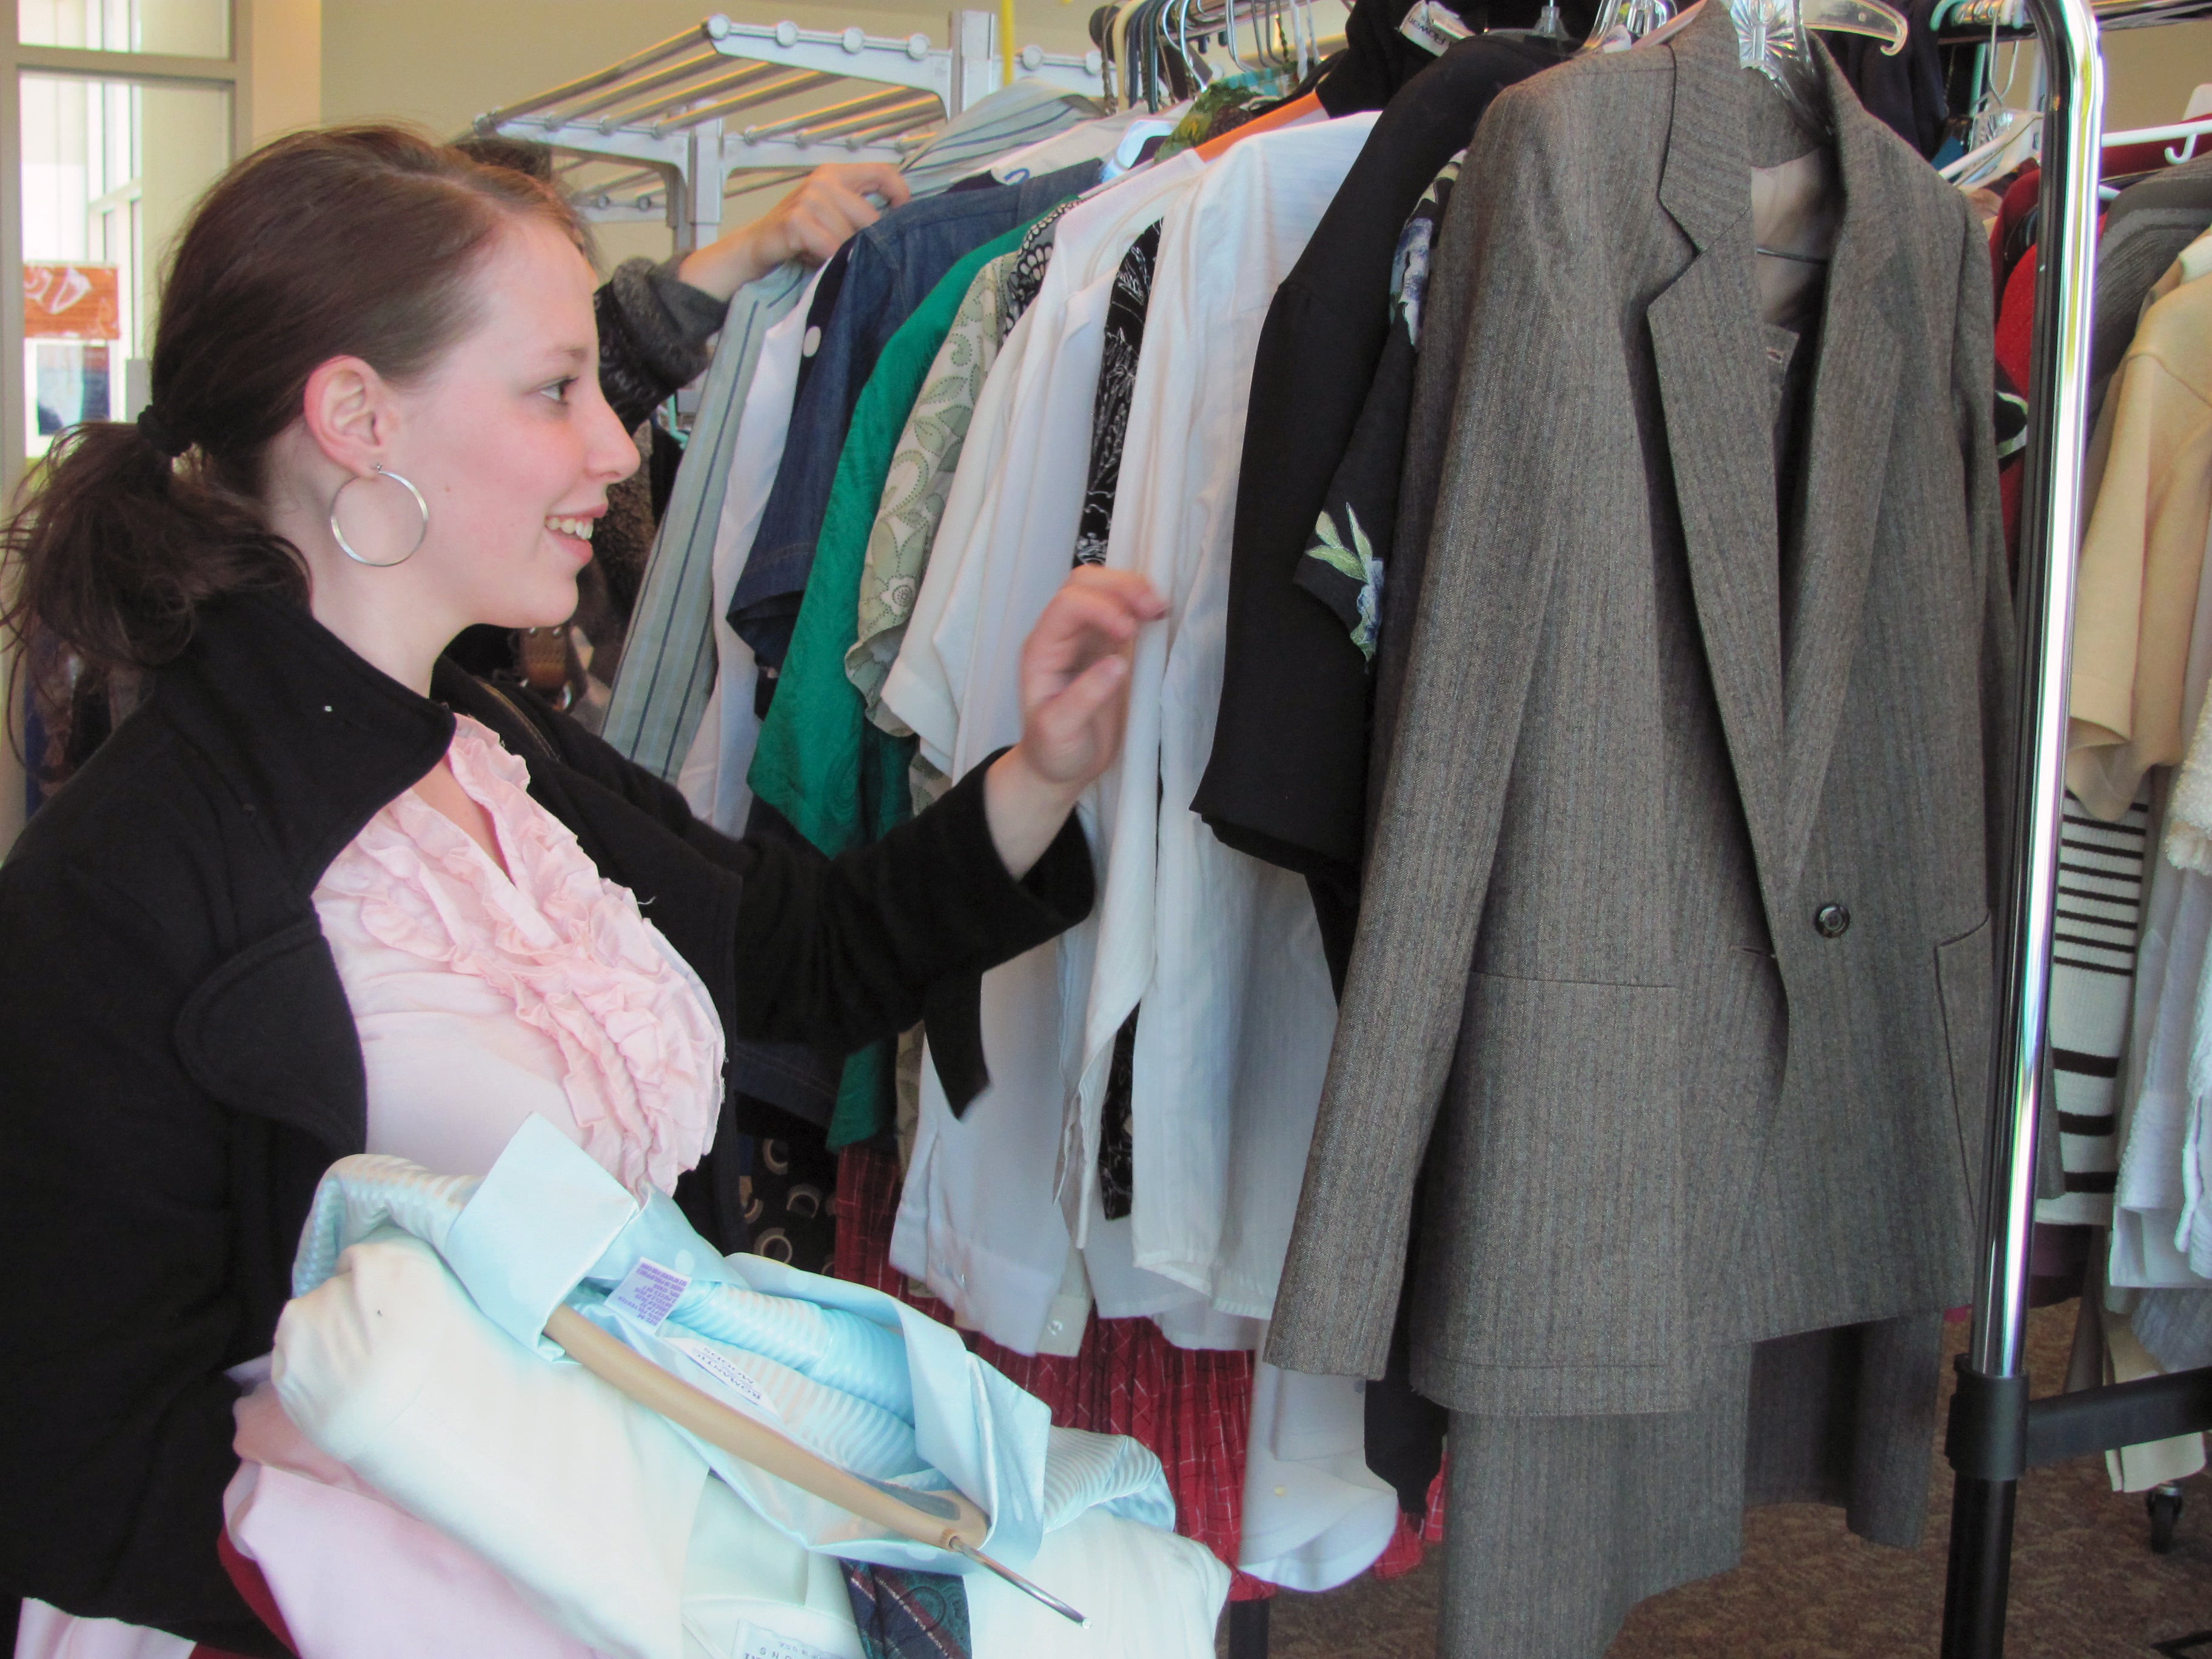 Samantha Knippel, 18, said the opportunity to look for free business clothing gave her a chance to, "know what to put together for job interviews and see what works well."